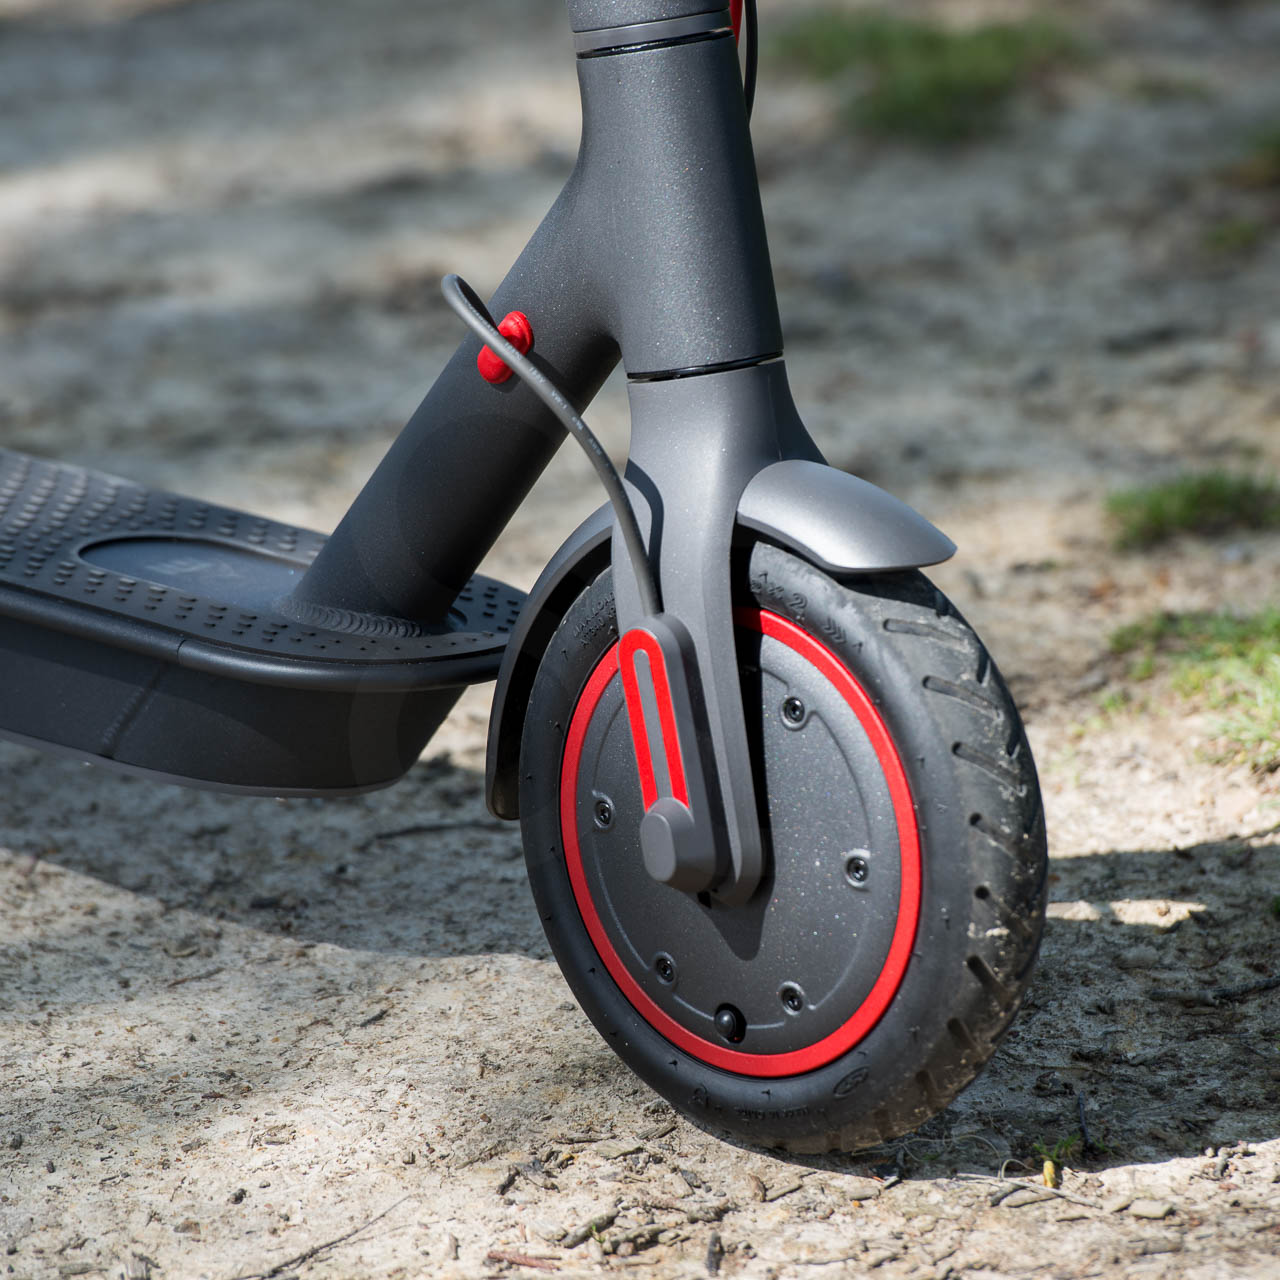 Xiaomi M365 review: The best budget e-scooter you can buy